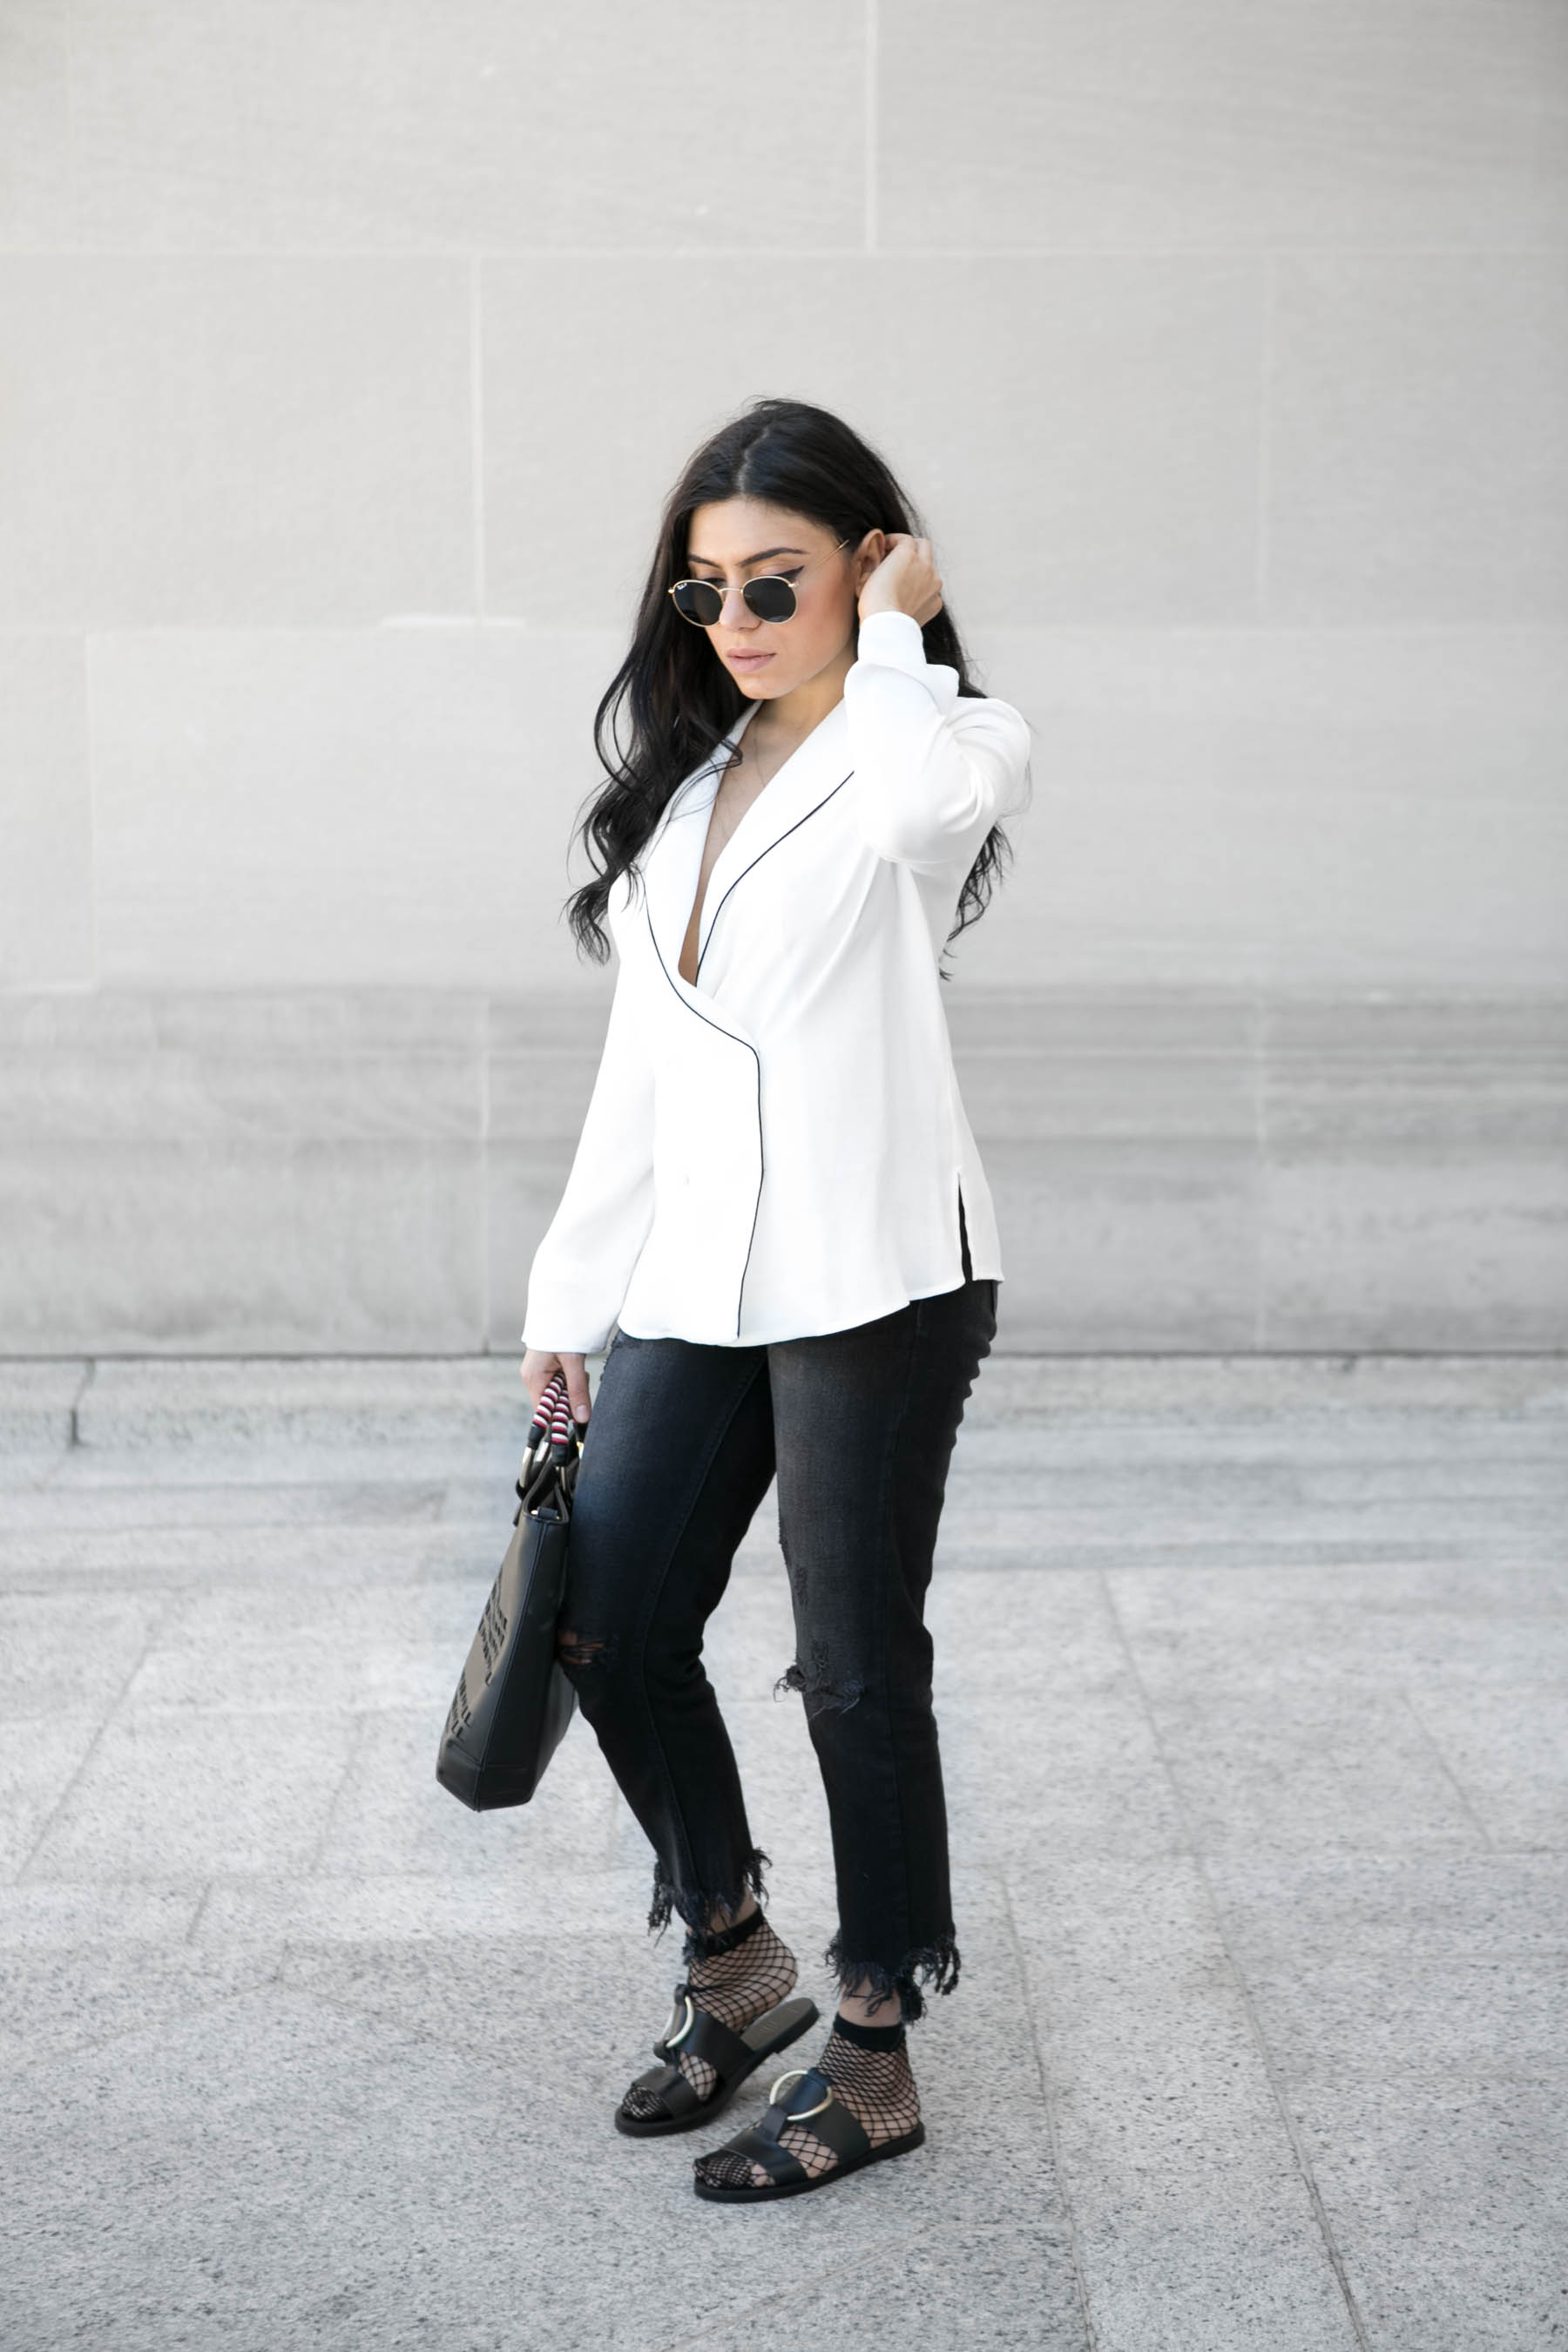 Black and whit outfit, ripped jeans, blazer top